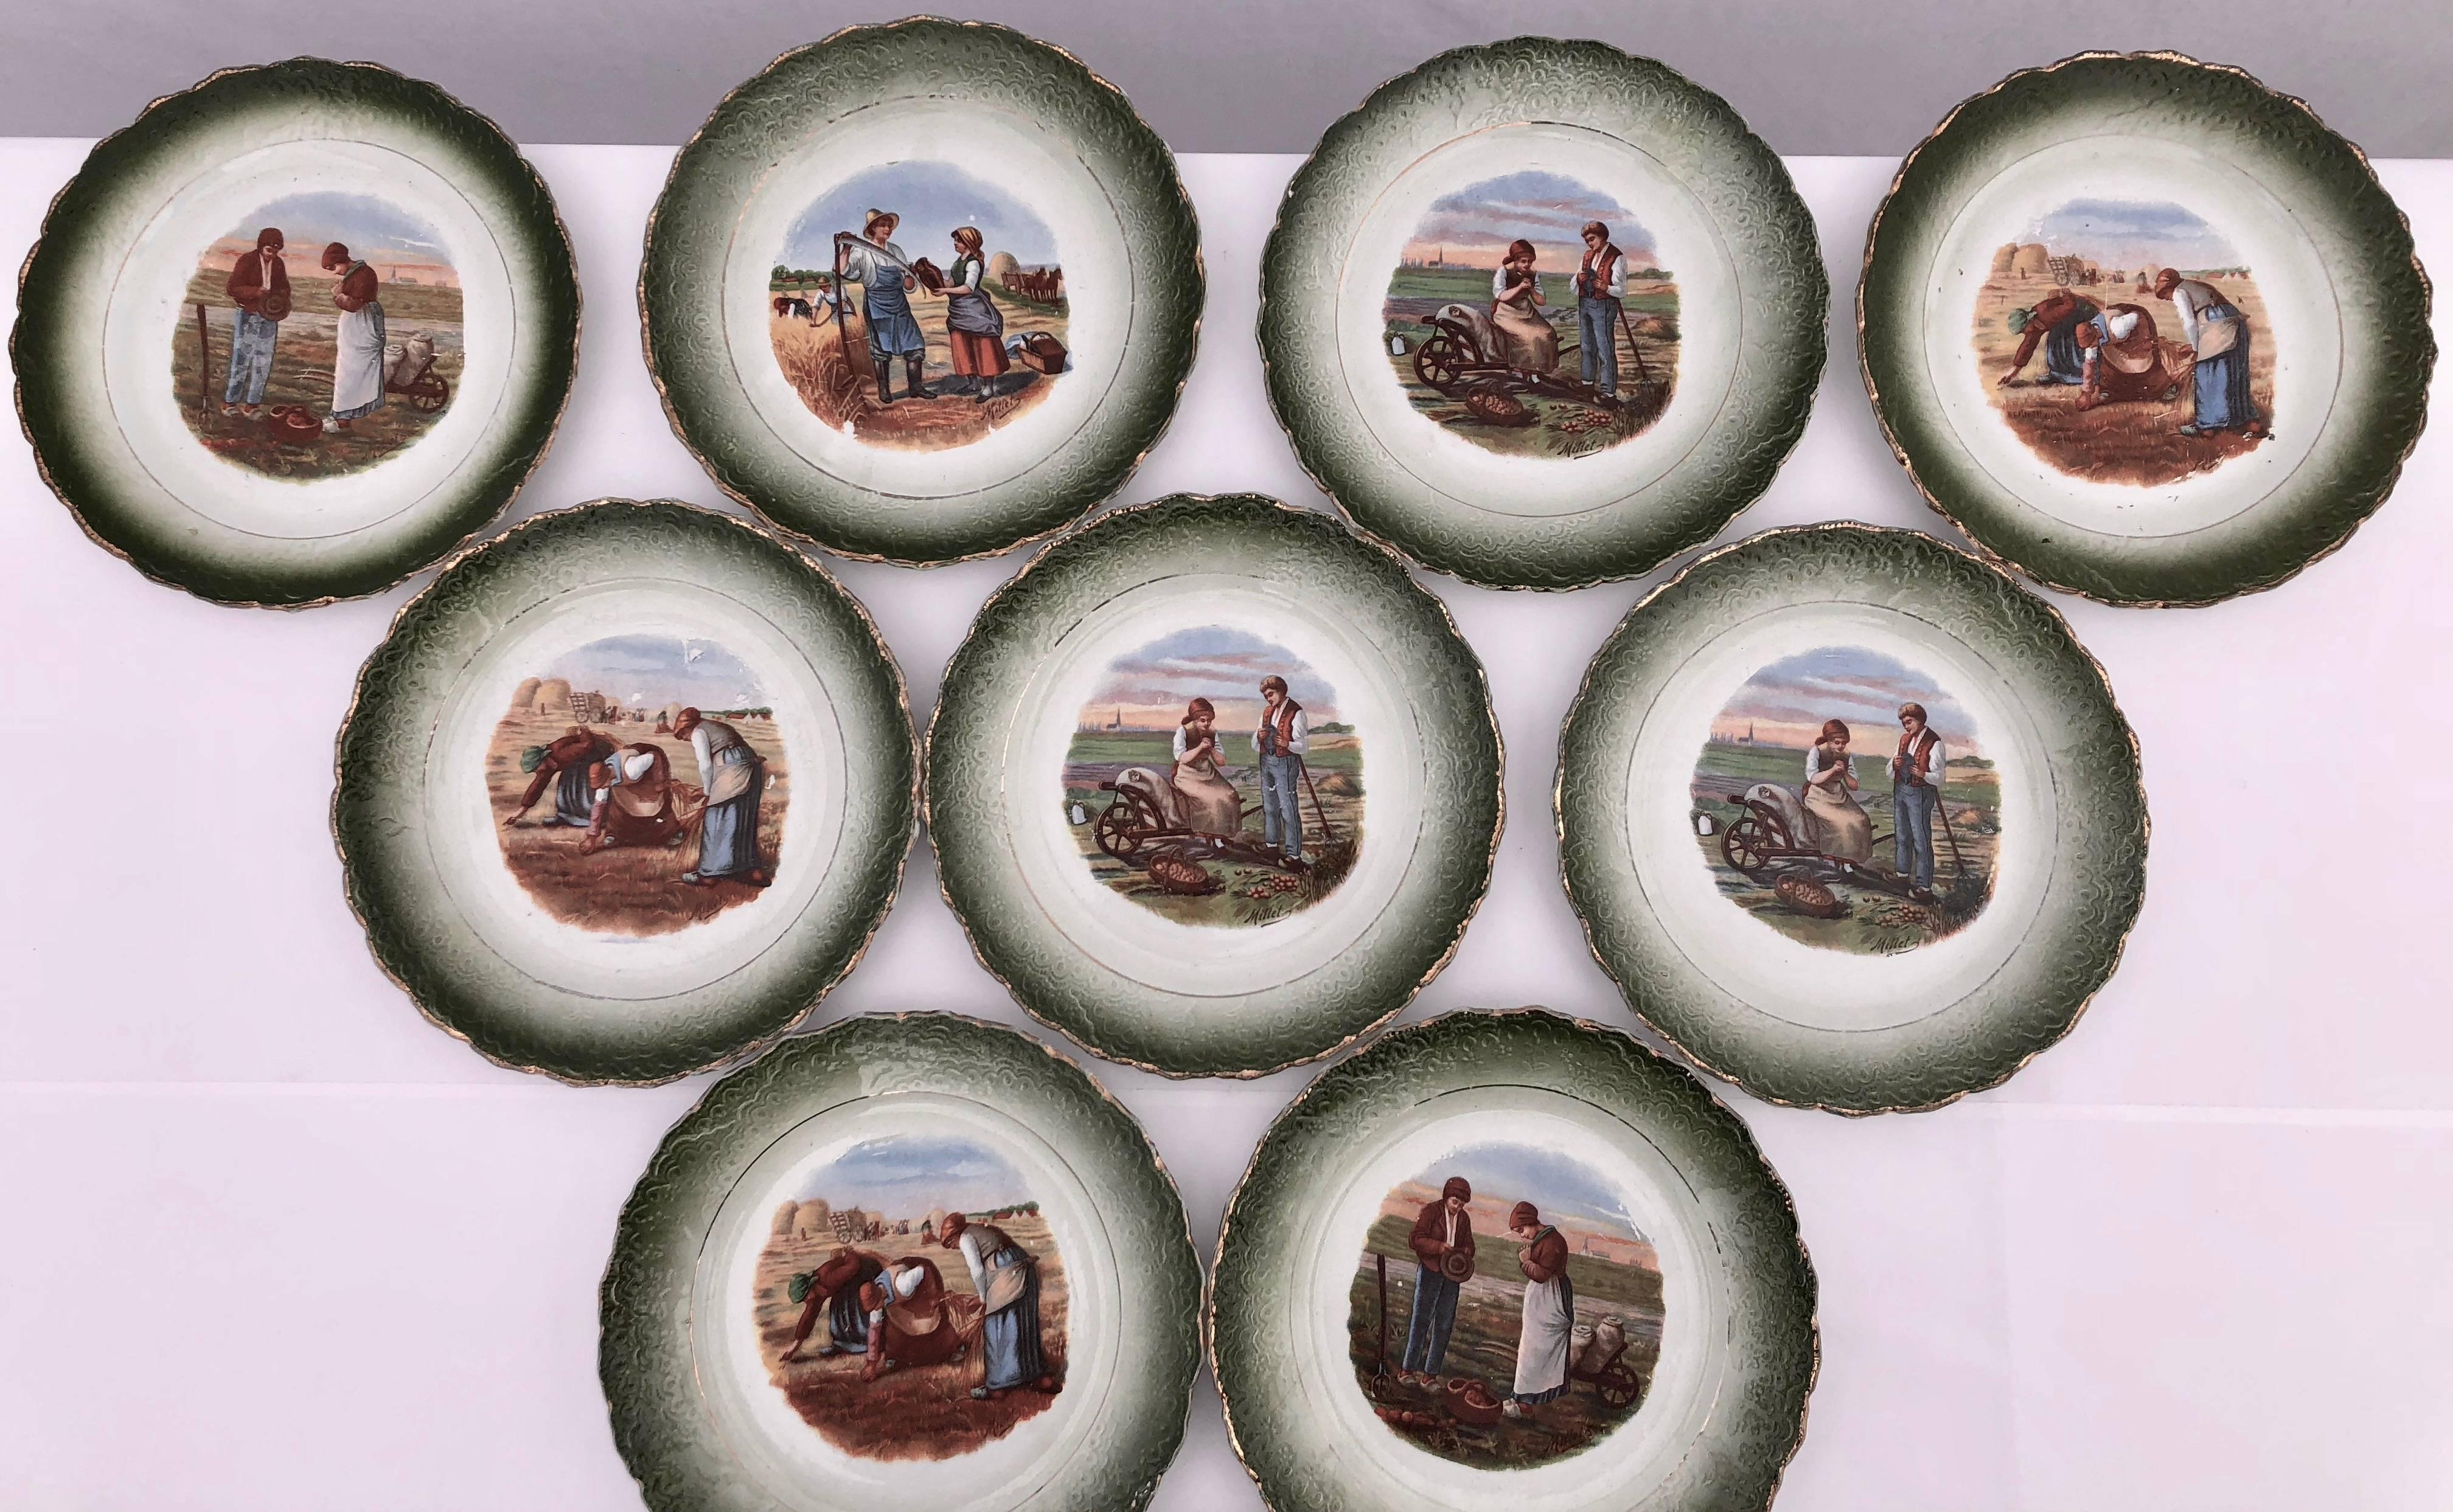 This is a lovely set of faïence plates showing transfer printed images of famous French artist Jean-François Millet. The scenes are all from Millet's farming paintings. All the plates have a beautiful green border around a white plate background